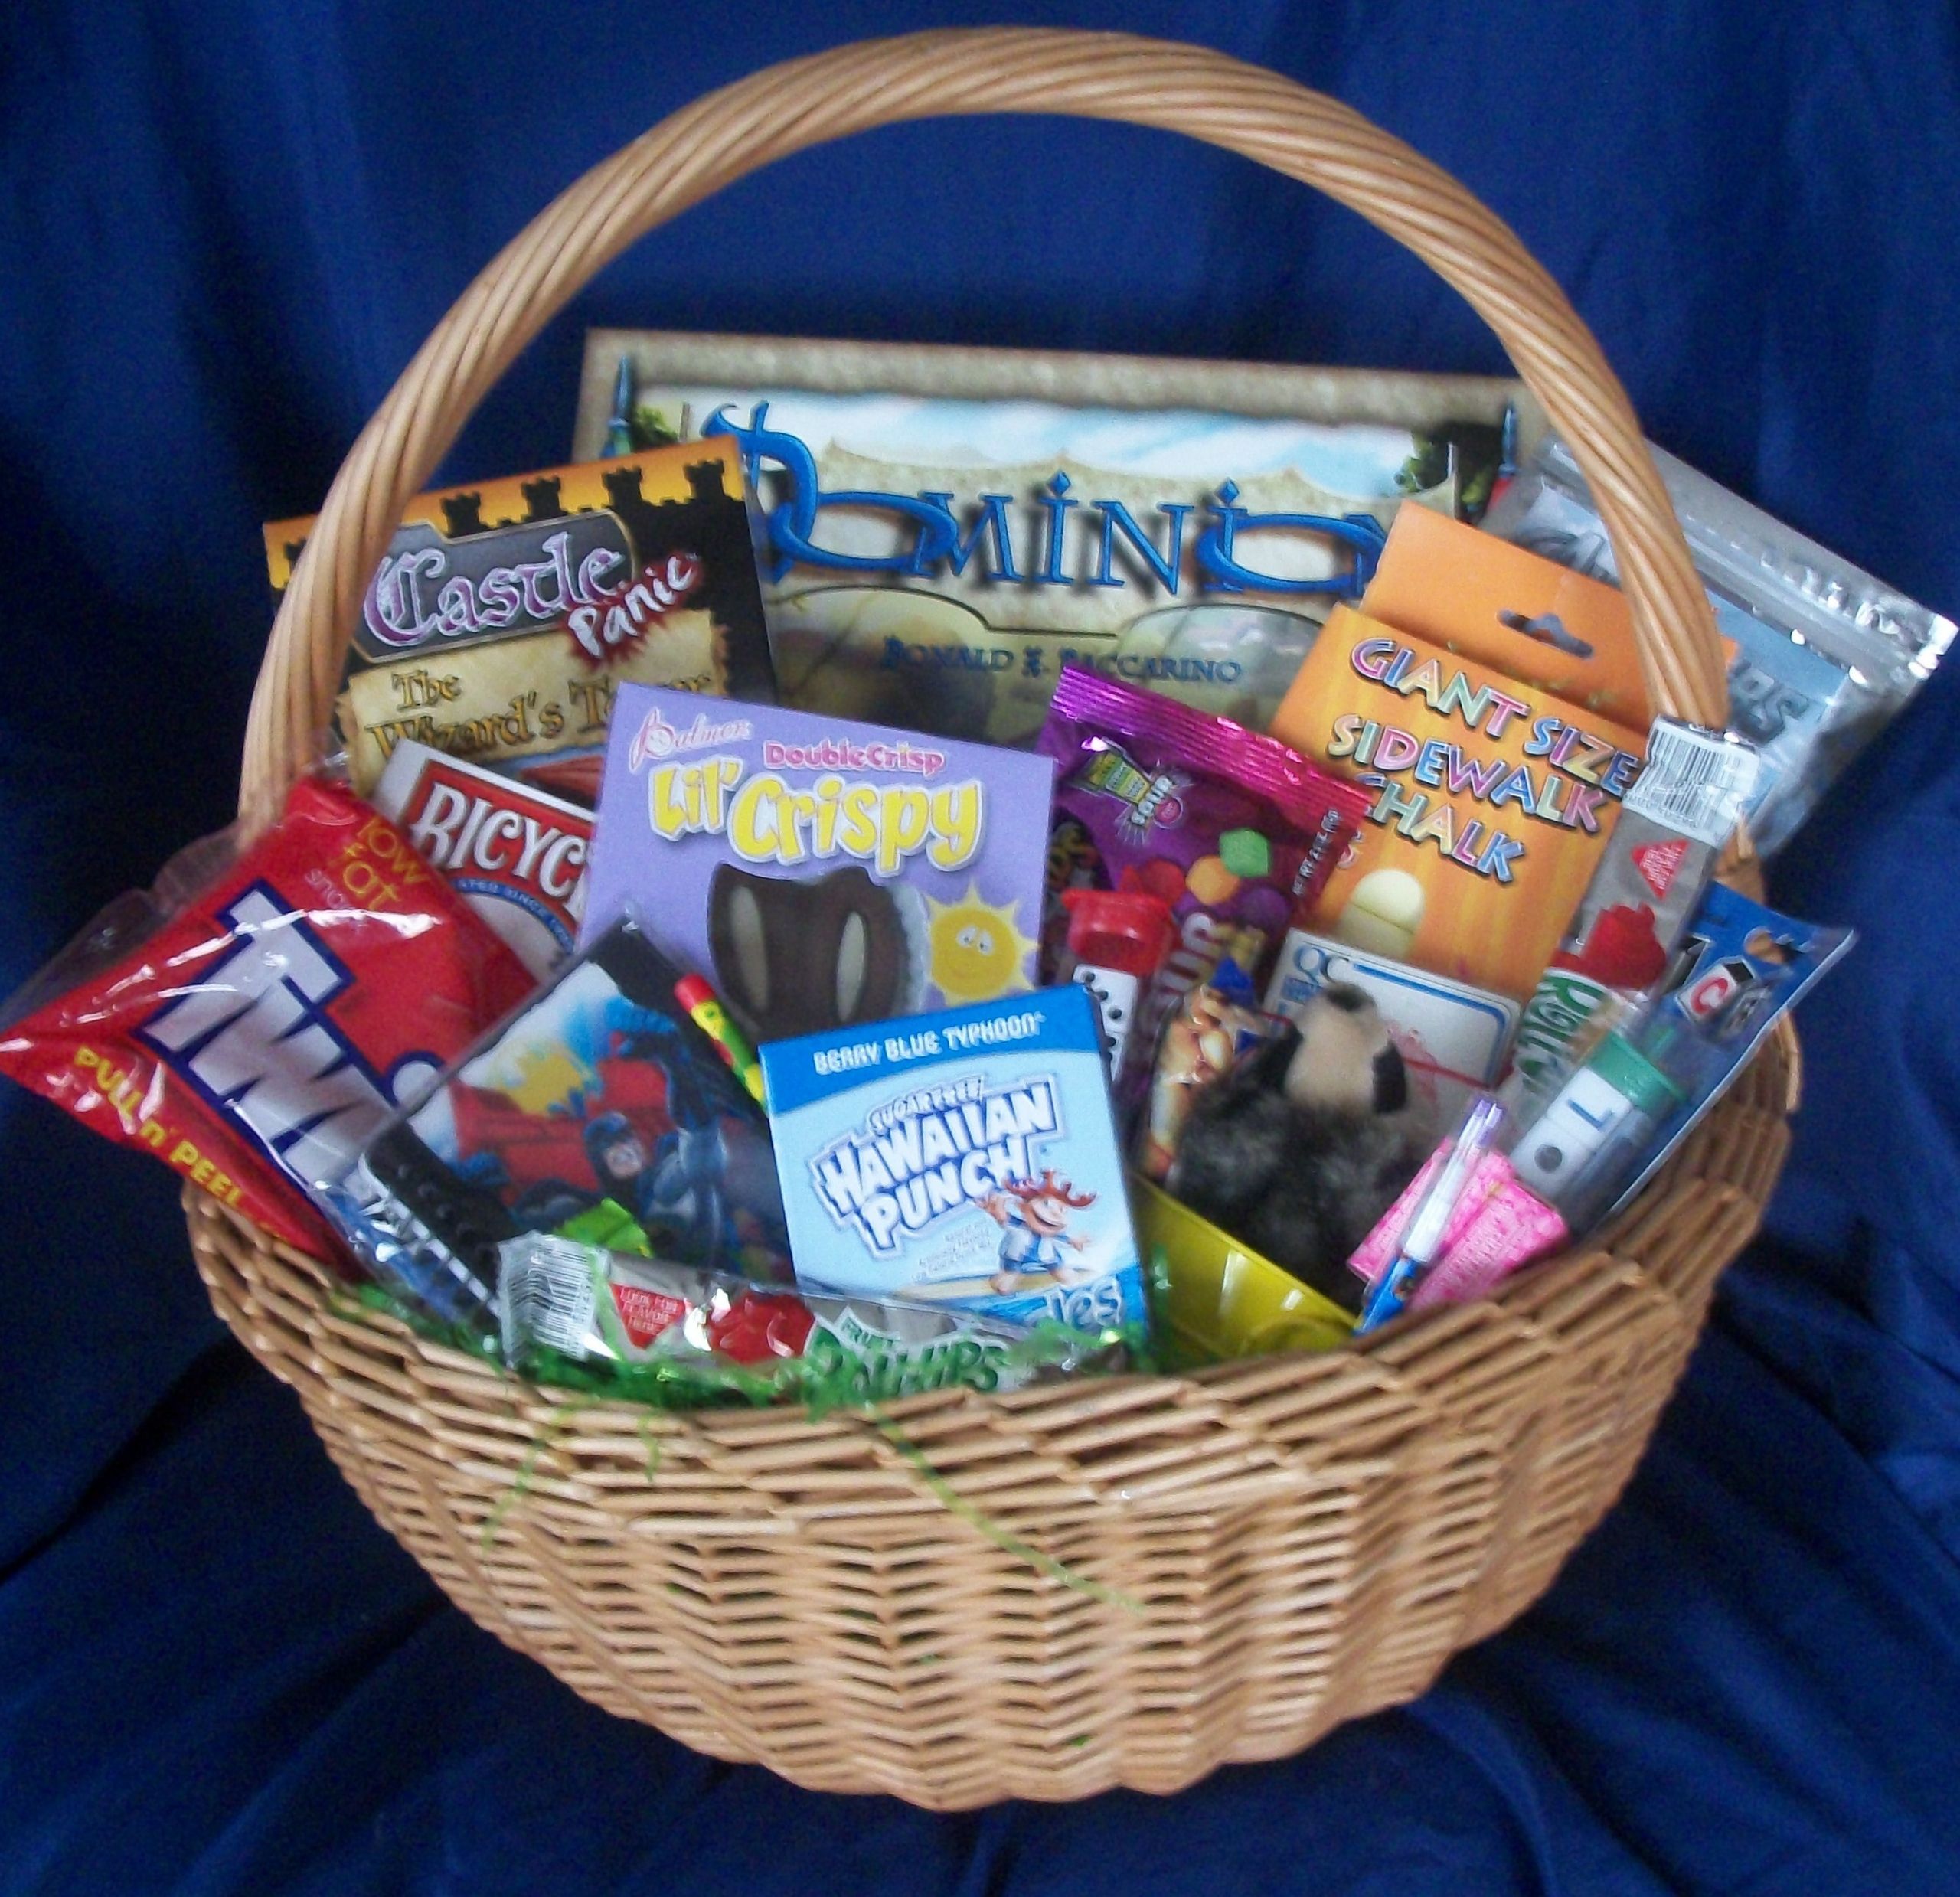 Game Gift Basket Ideas
 Game Gift Baskets – All About Fun and Games